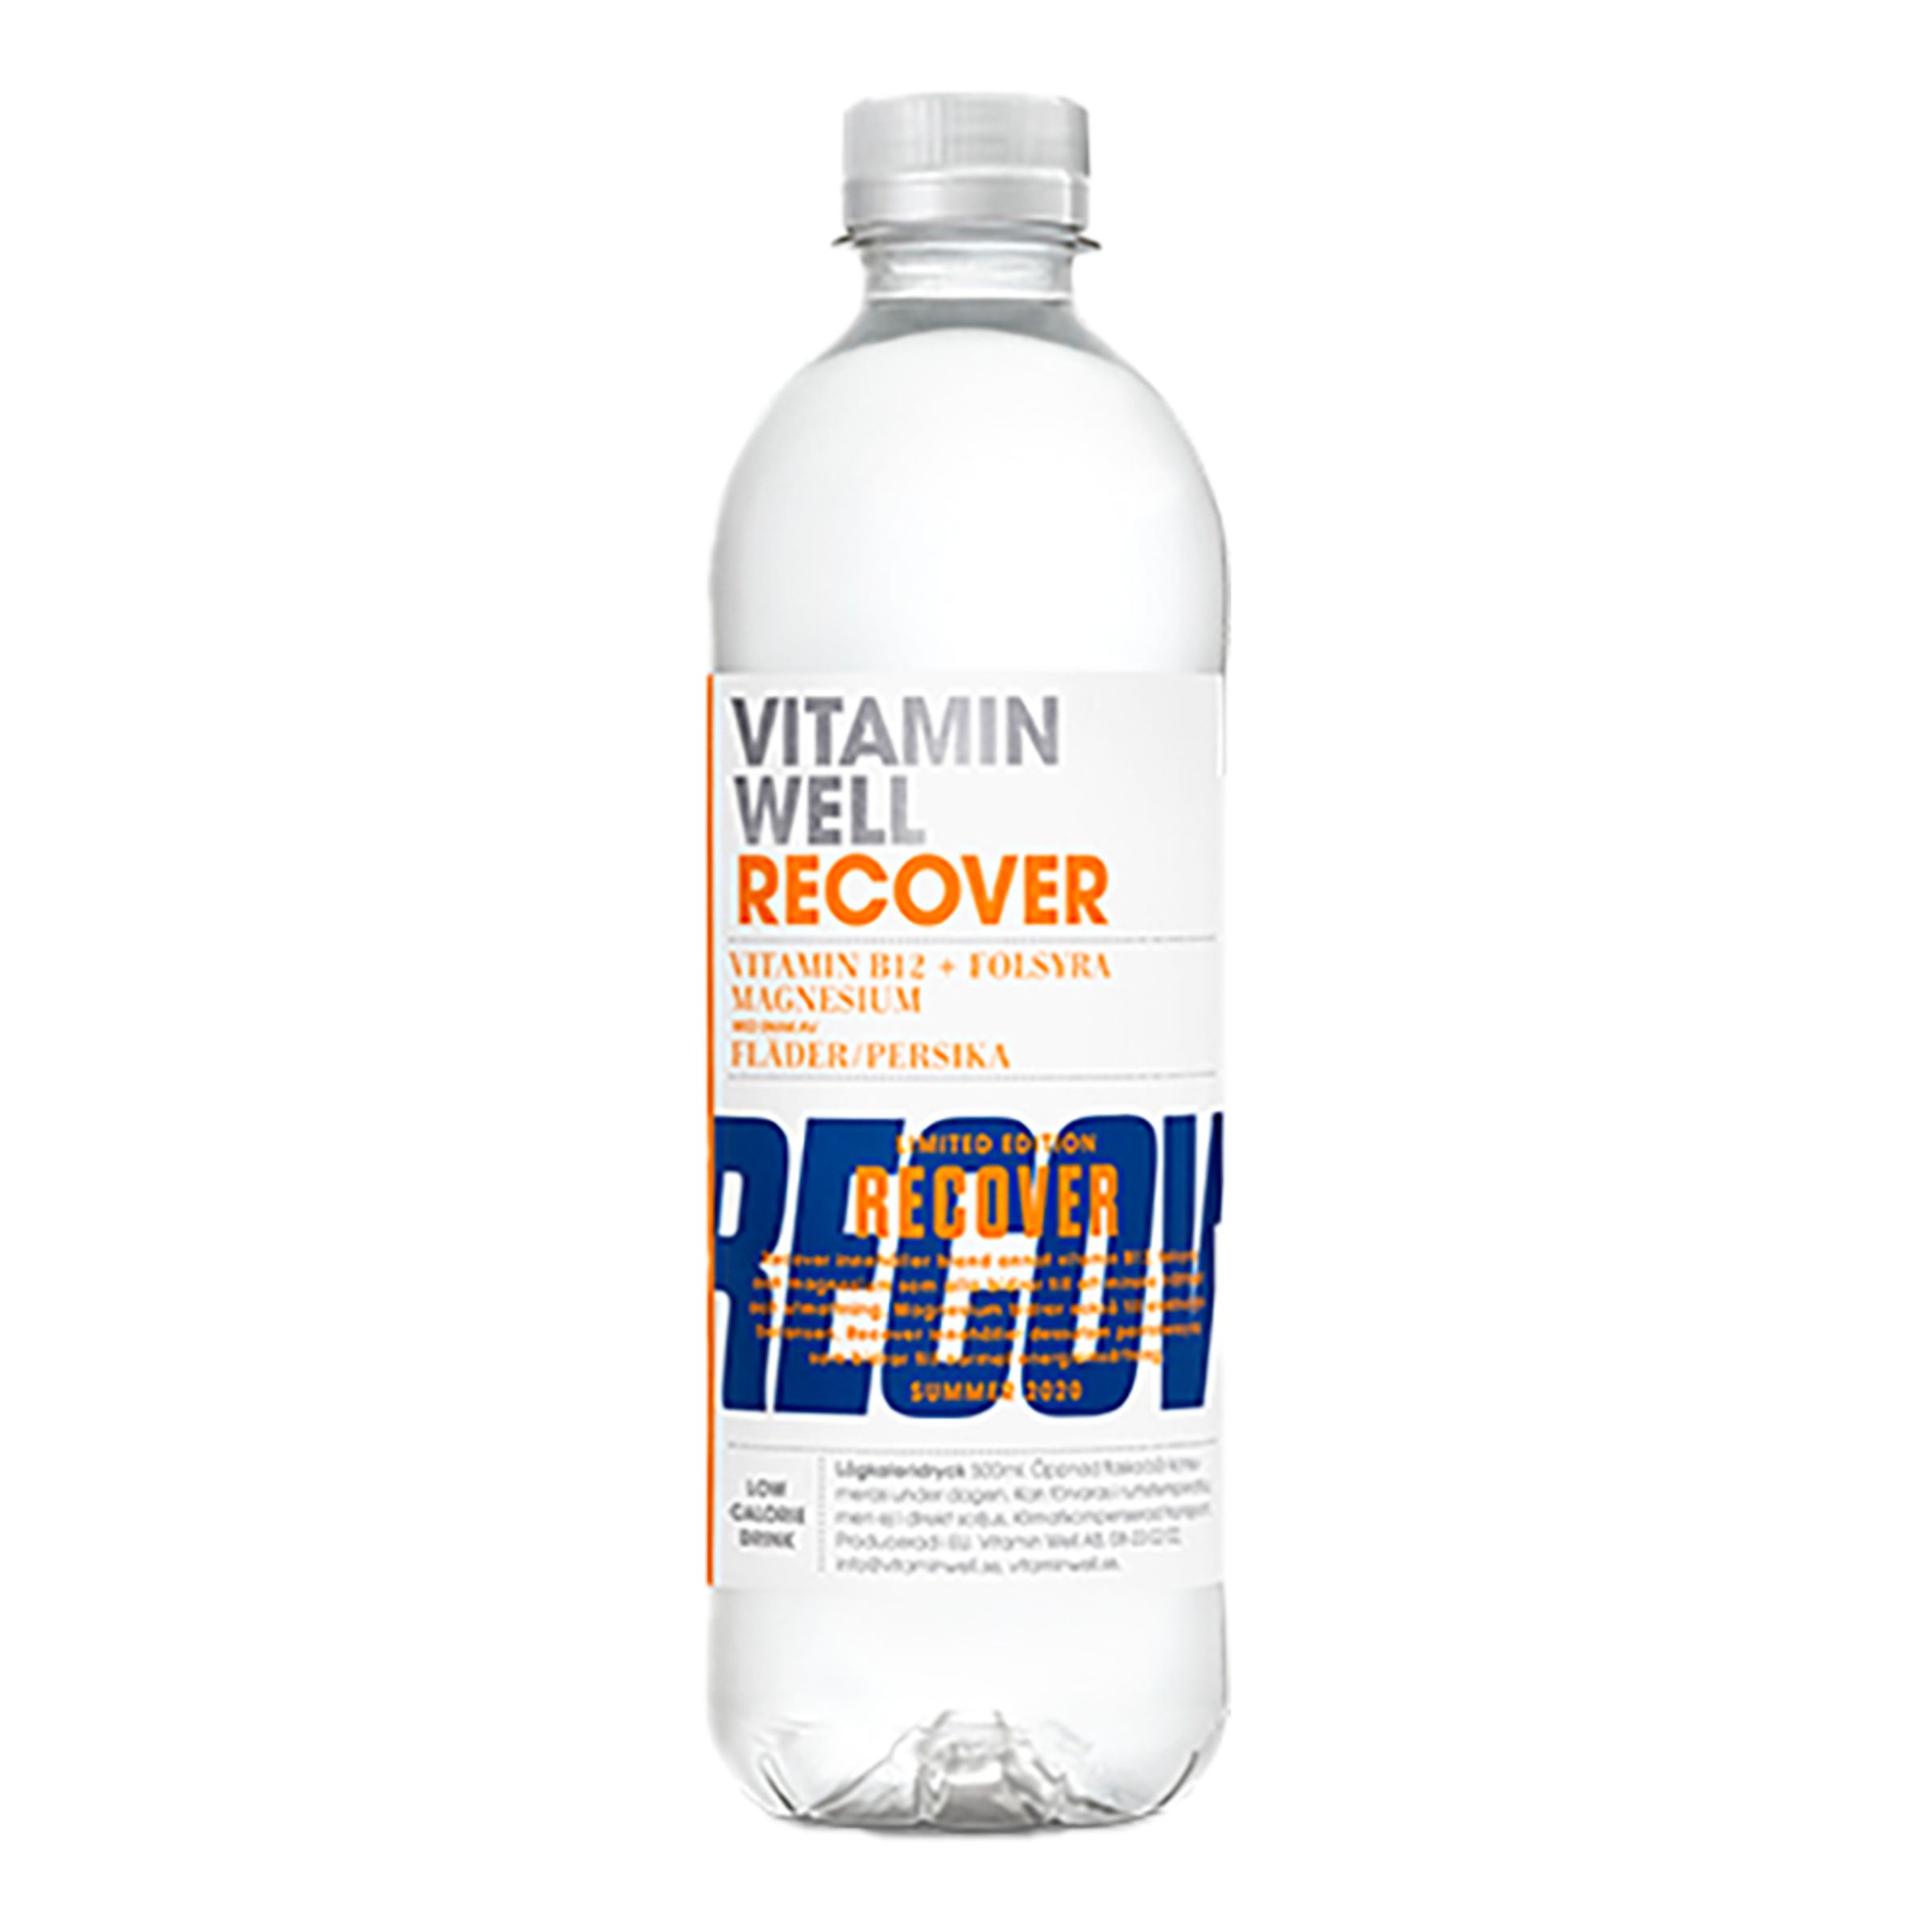 Vitamin Well Recover - 1-pack